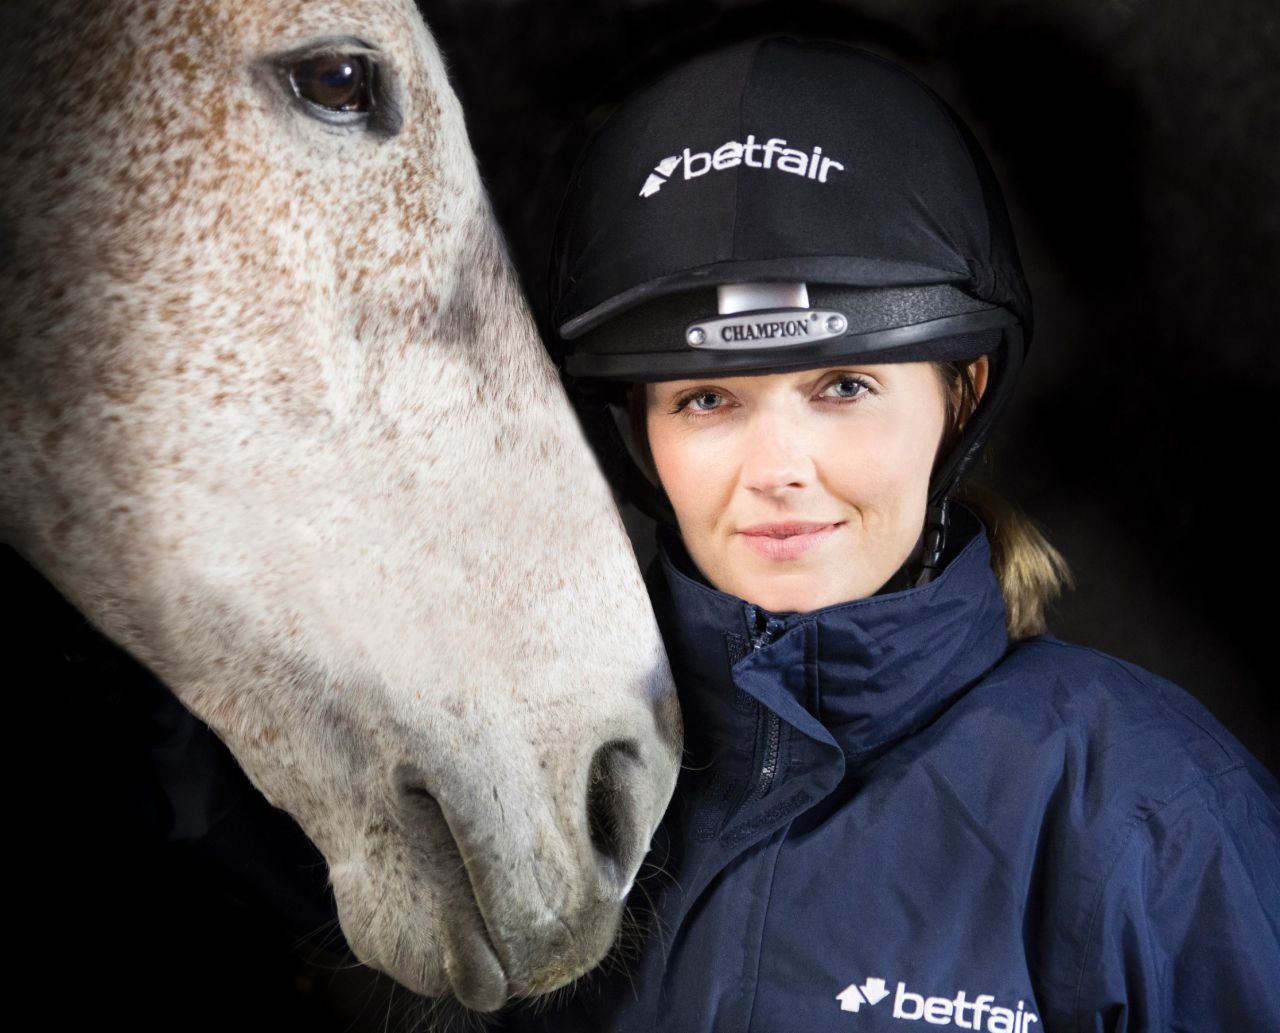 Track cycling champion Victoria Pendleton has taken up the challenge laid down by UK betting company betfair to train as a amateur jockey with the aim of riding at the Cheltenham Festival in 2016.